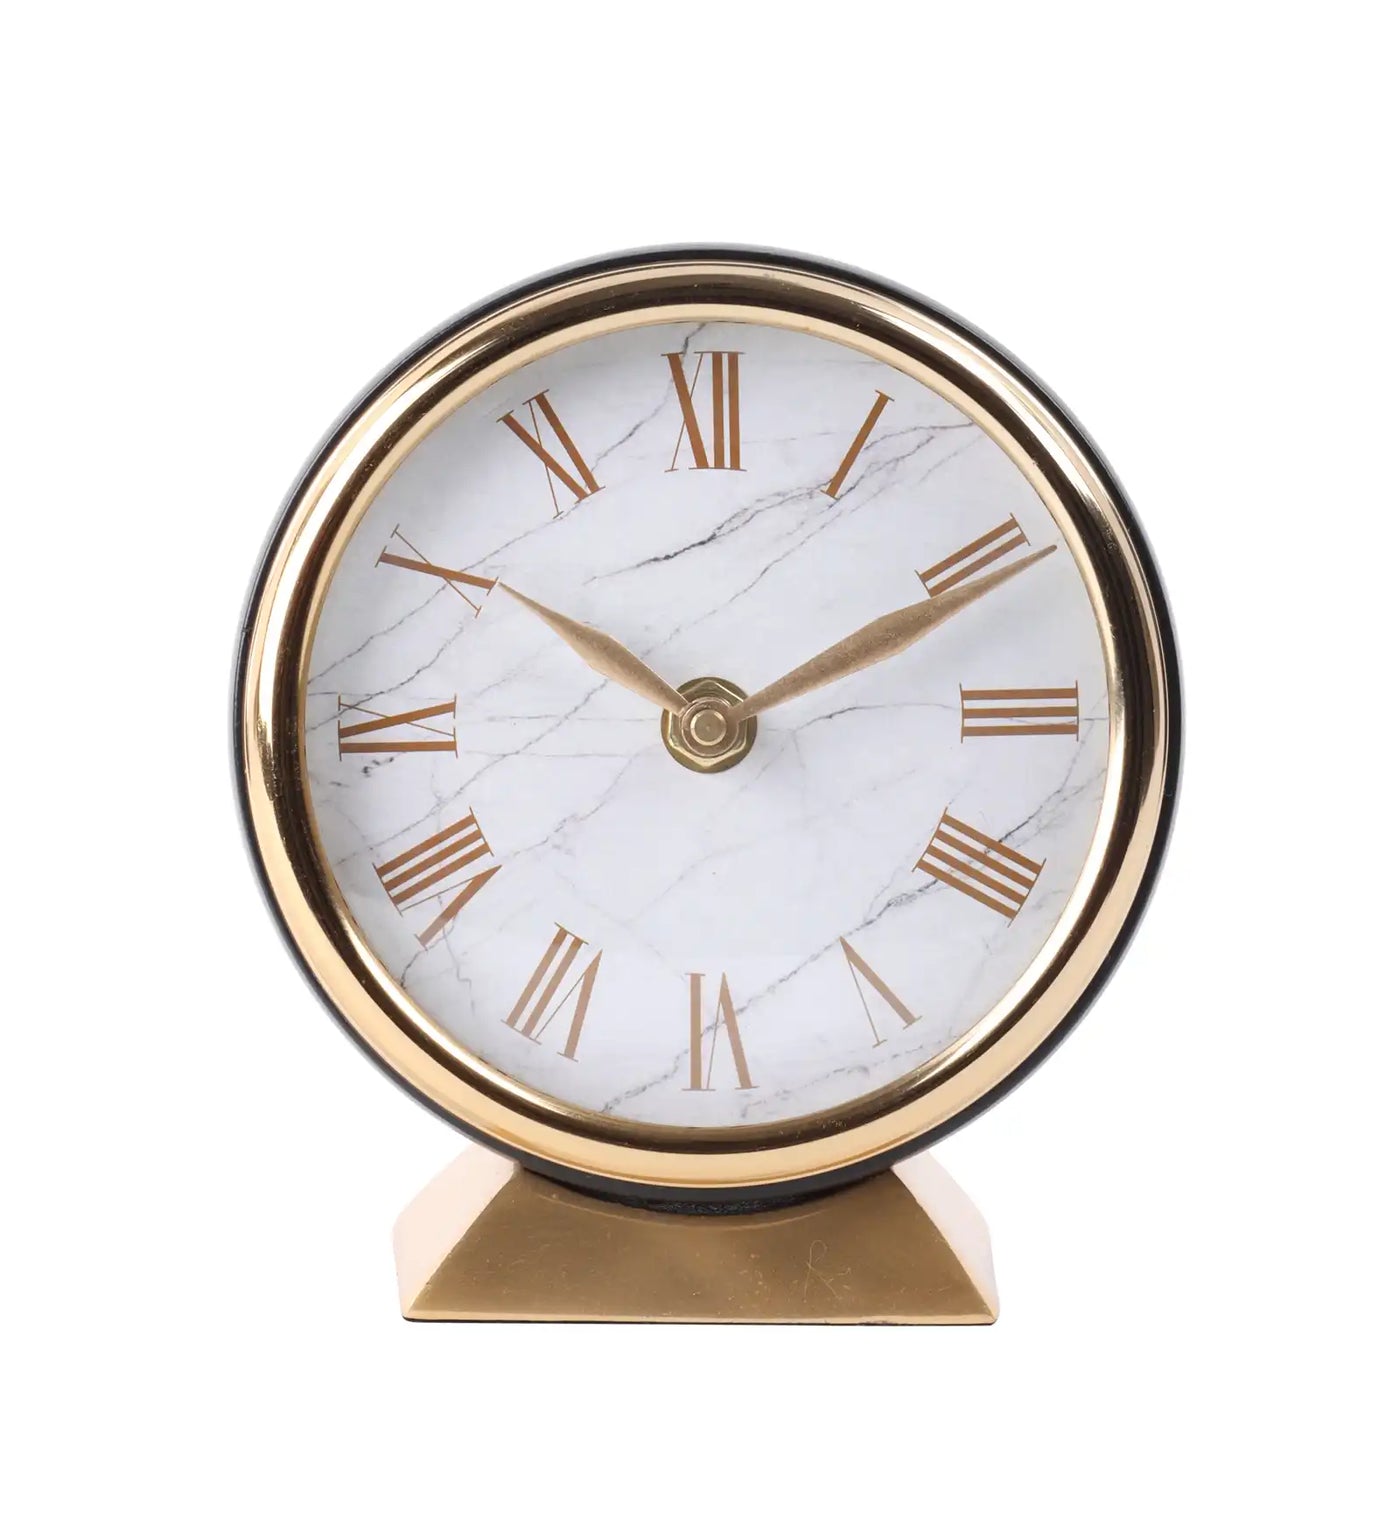 Handcrafted Gold Dial Clock Aesthetic Table Clock 42-528-16-5